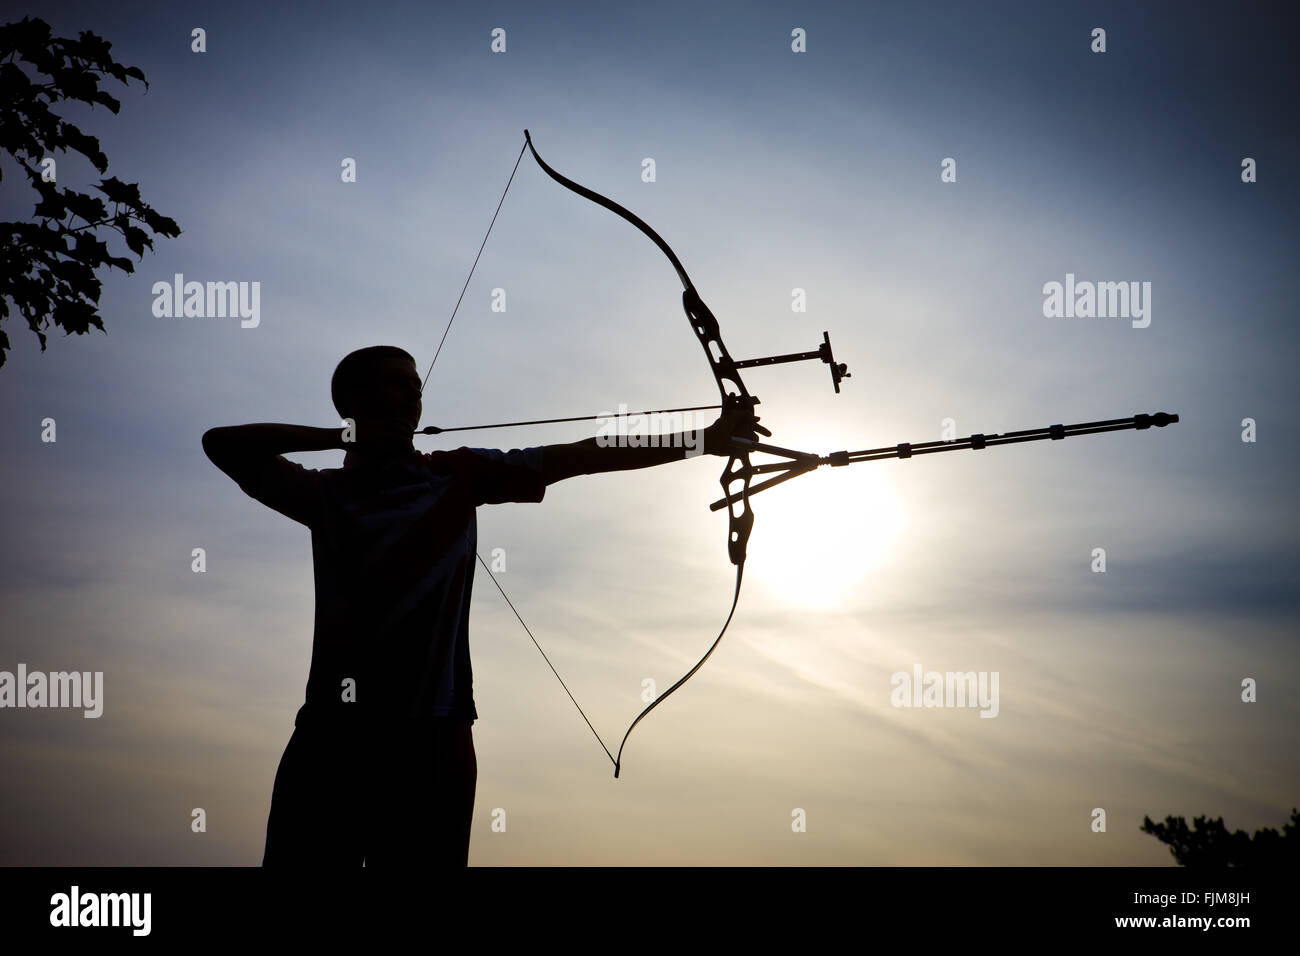 Iconic image of an archer firing an arrow with a bow stock photo